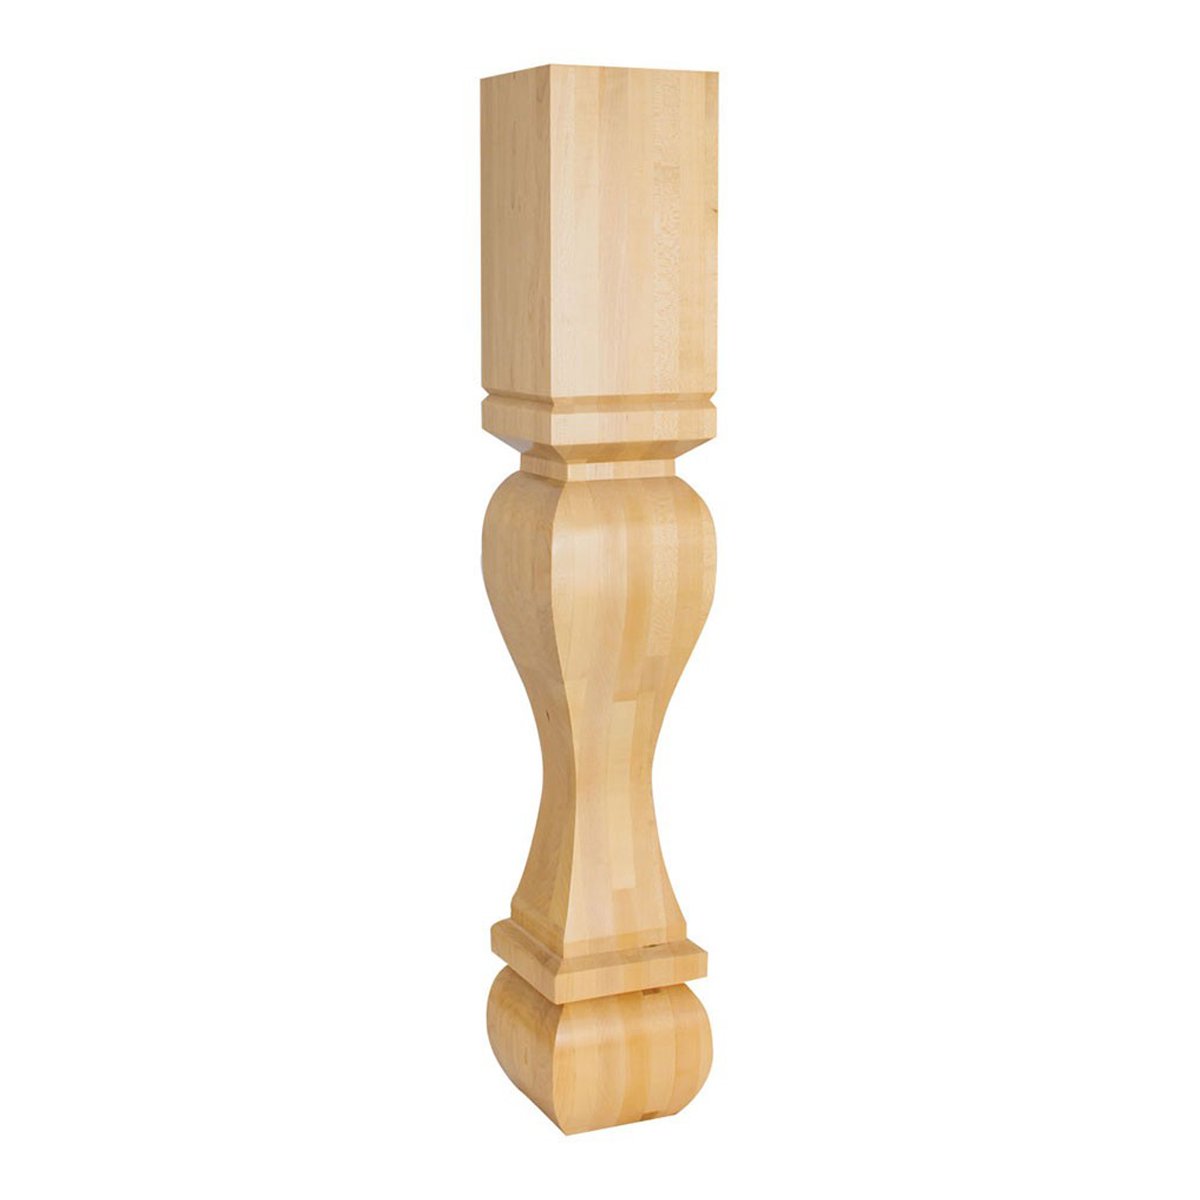 Hardware Resources 6" x 6" x 35-1/2" Square Hard Maple Post / Table Leg with Foot-DirectSinks